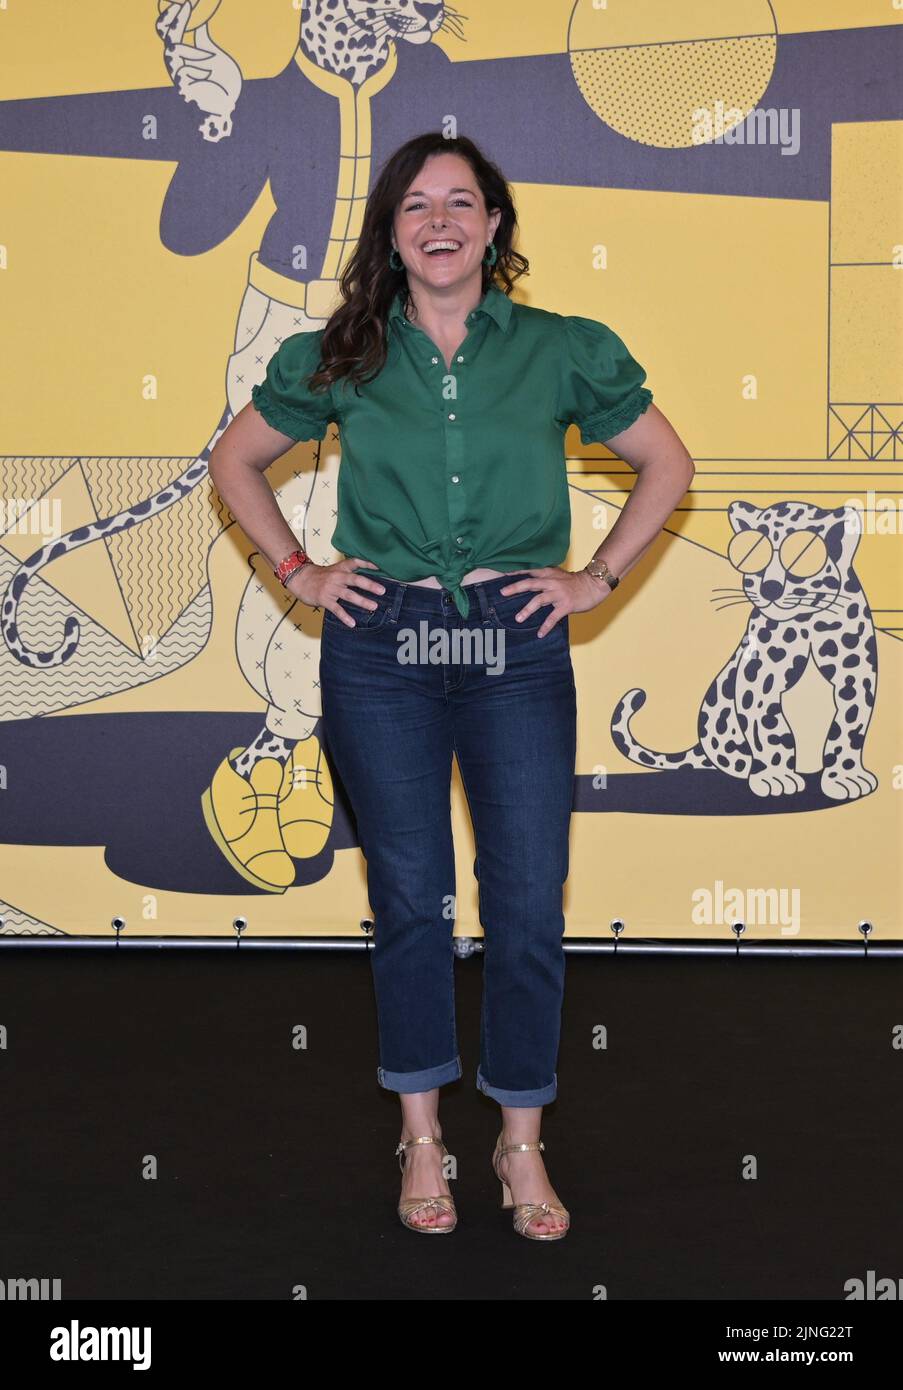 Locarno, Switzerland. 11th Aug, 2022. Locarno, Swiss Locarno Film Festival 2022 ANNIE COLERE photocall film cast, producer In the picture: Laure Calamy actress Credit: Independent Photo Agency/Alamy Live News Stock Photo